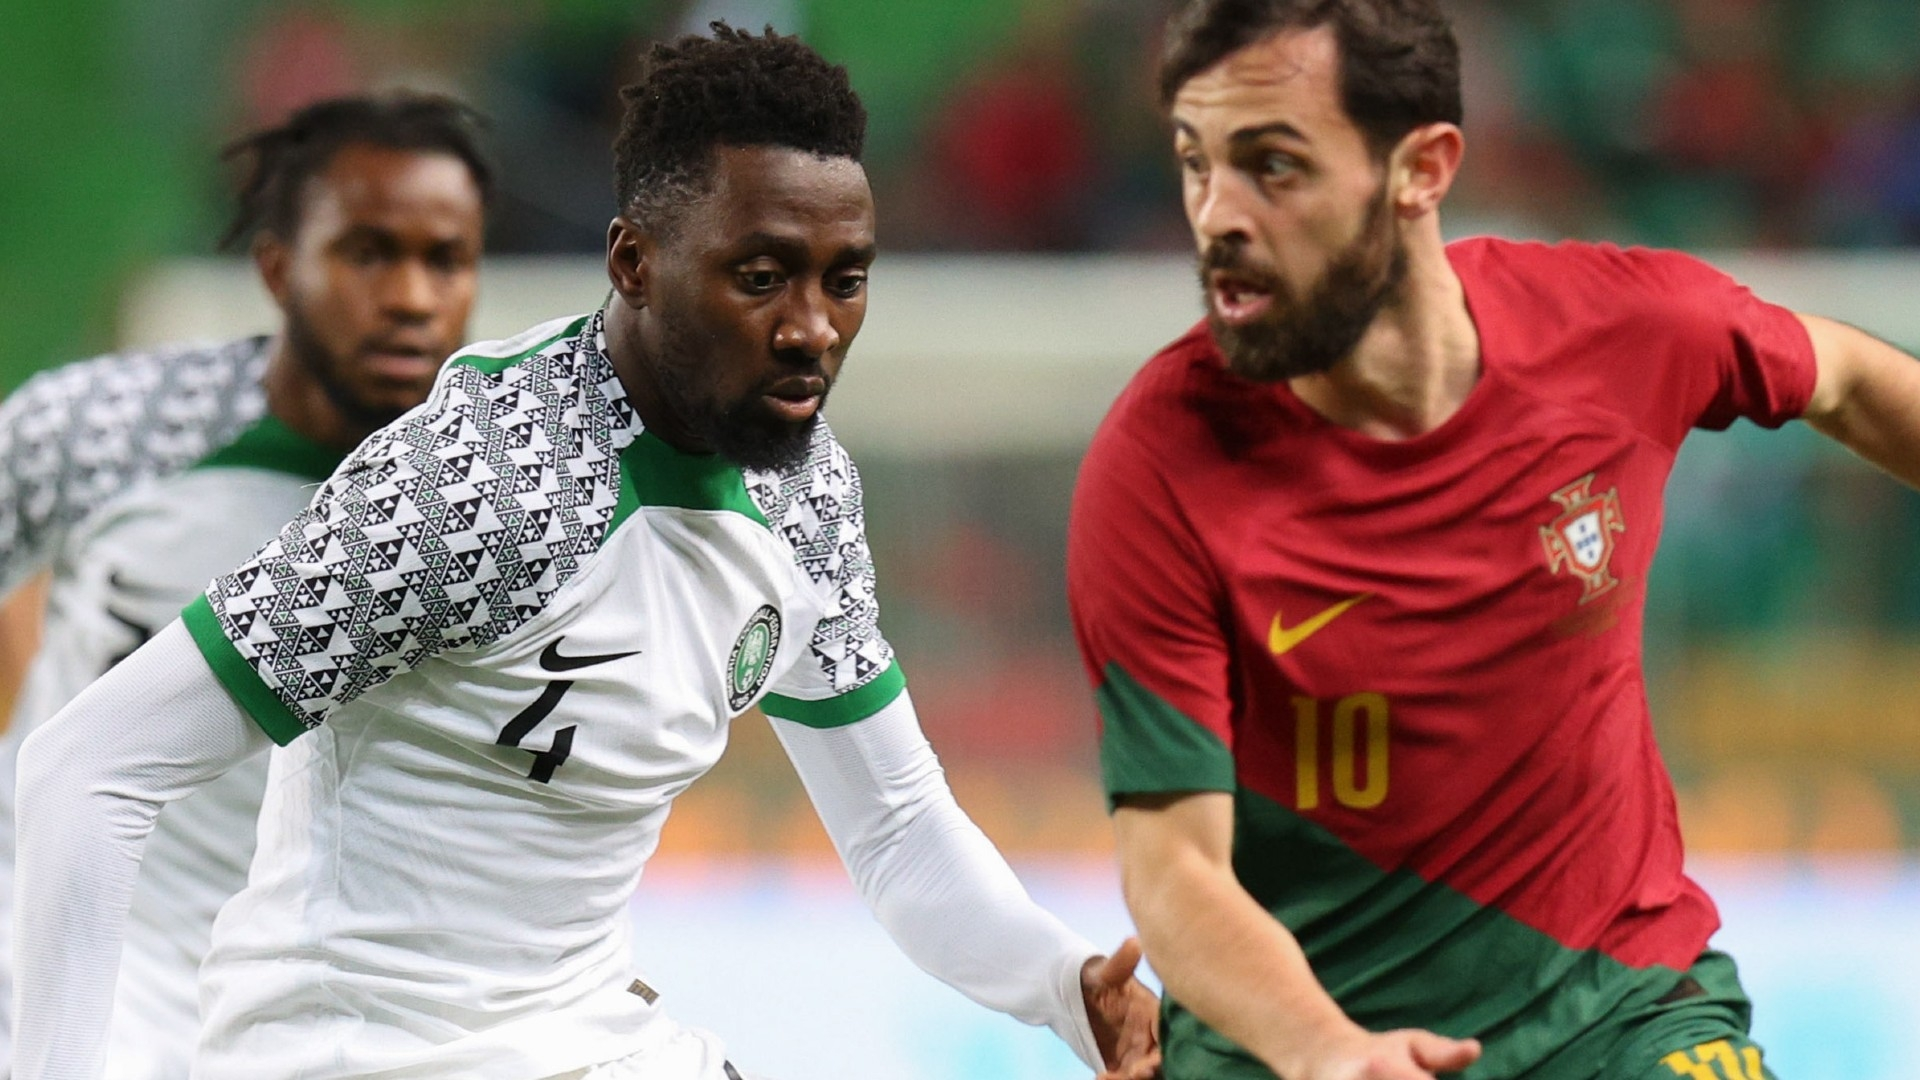 Wilfred Ndidi is Out of the Super Eagles AFCON squad due to injury, Alhassan Yusuf will step in as a replacement